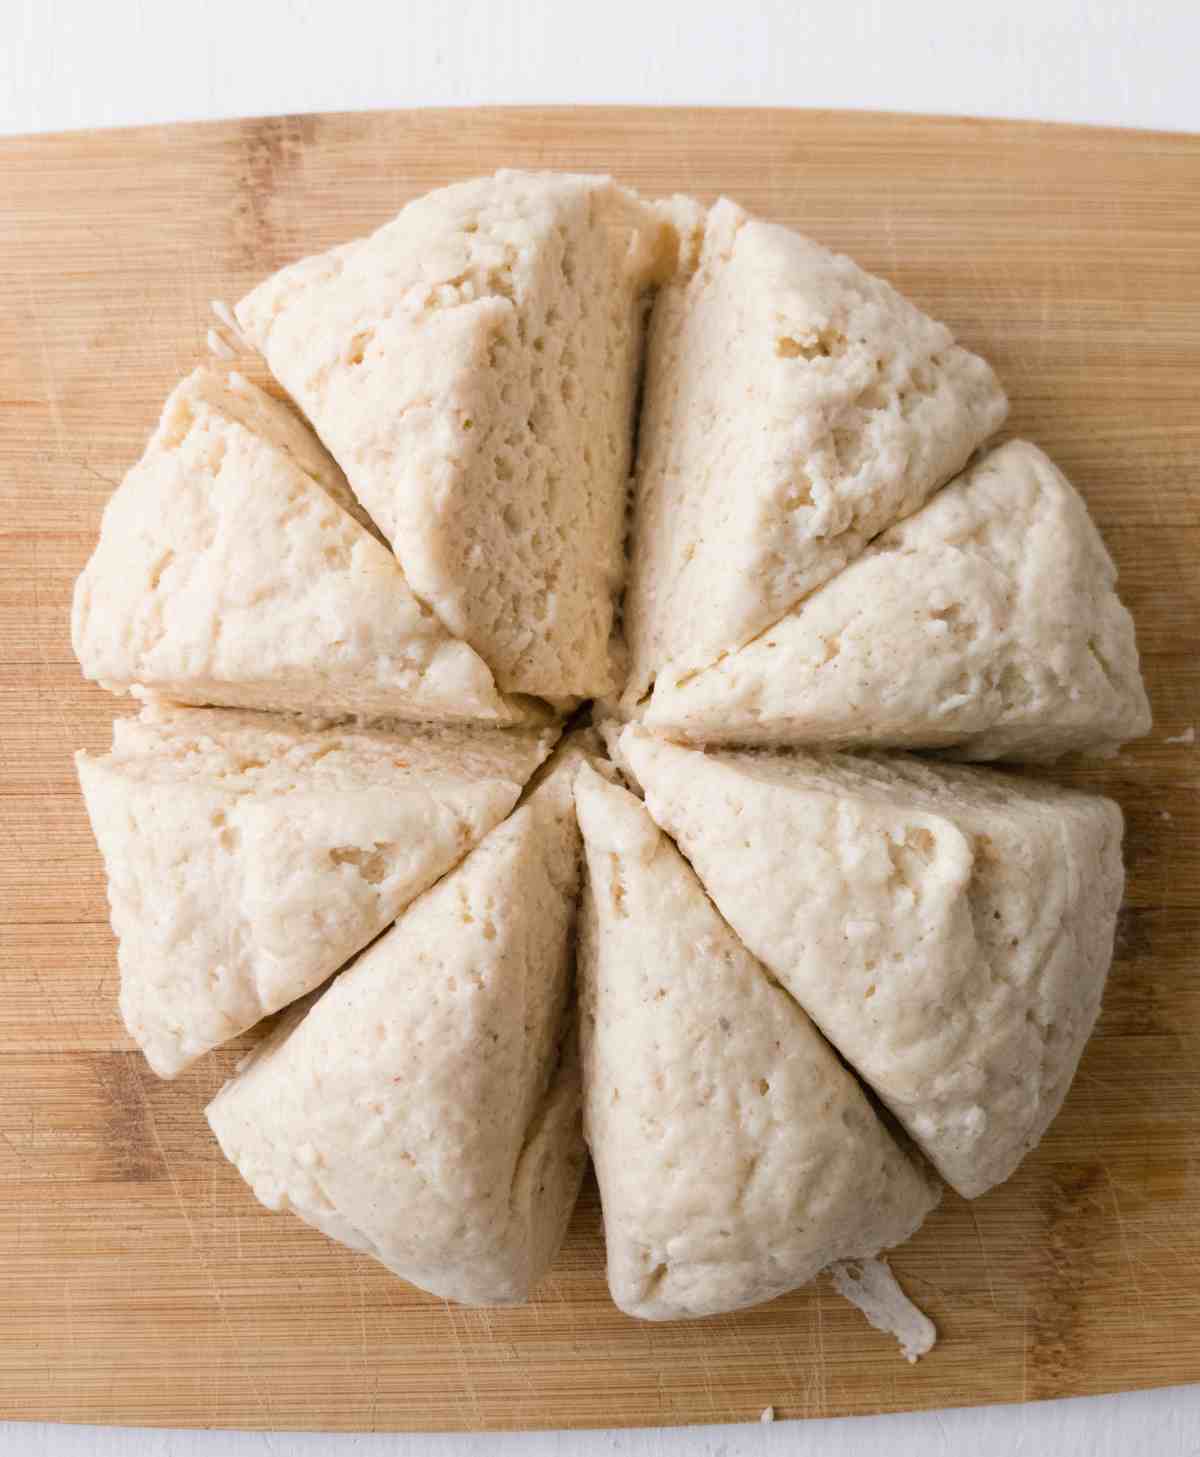 The dough separated into 8 parts.